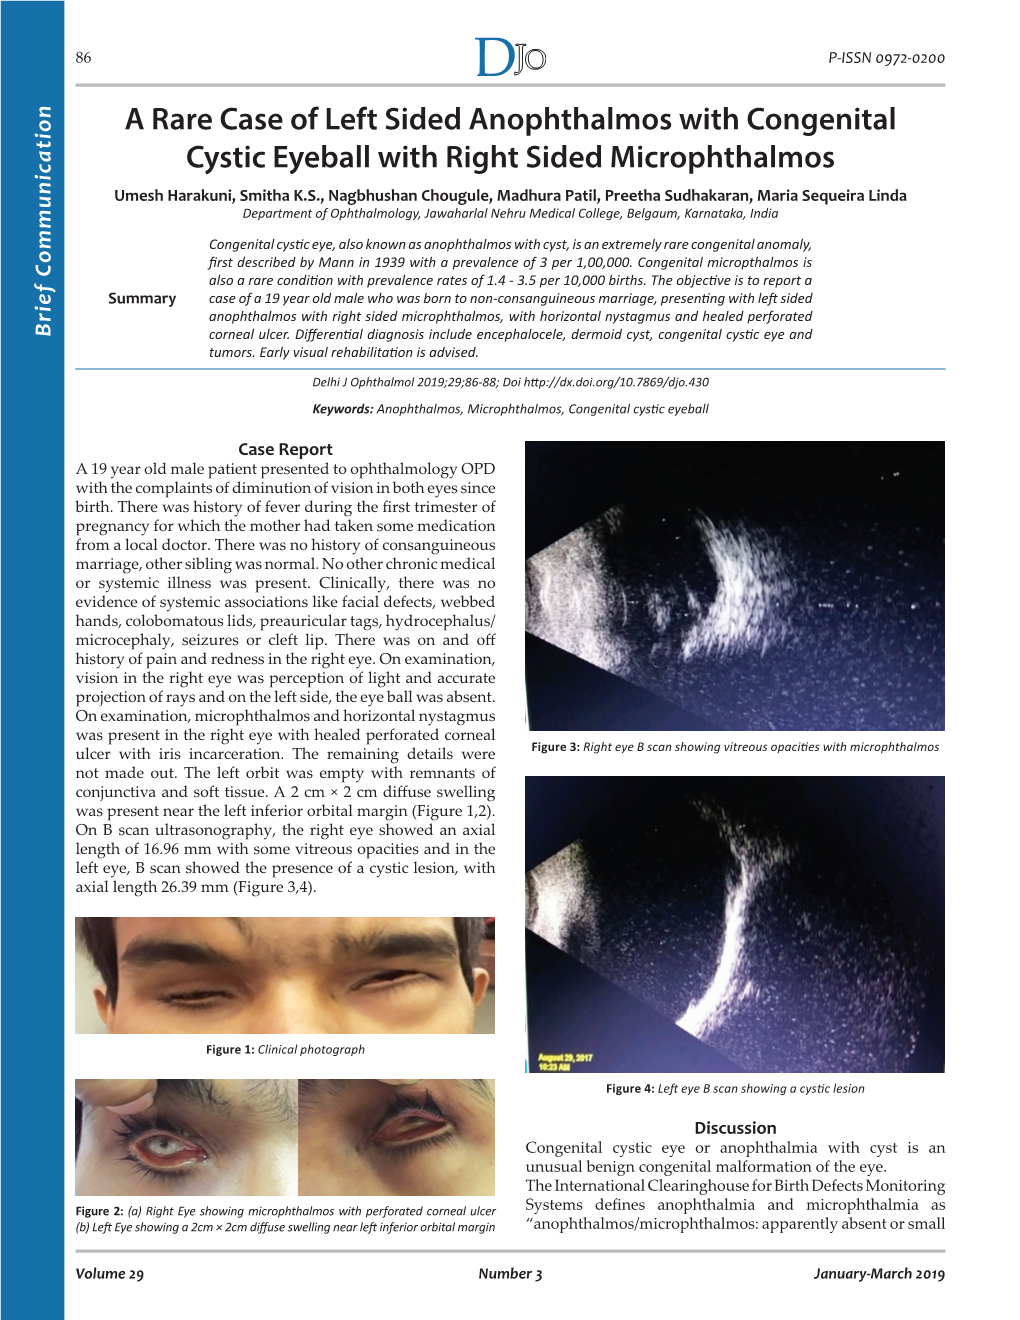 A Rare Case of Left Sided Anophthalmos with Congenital